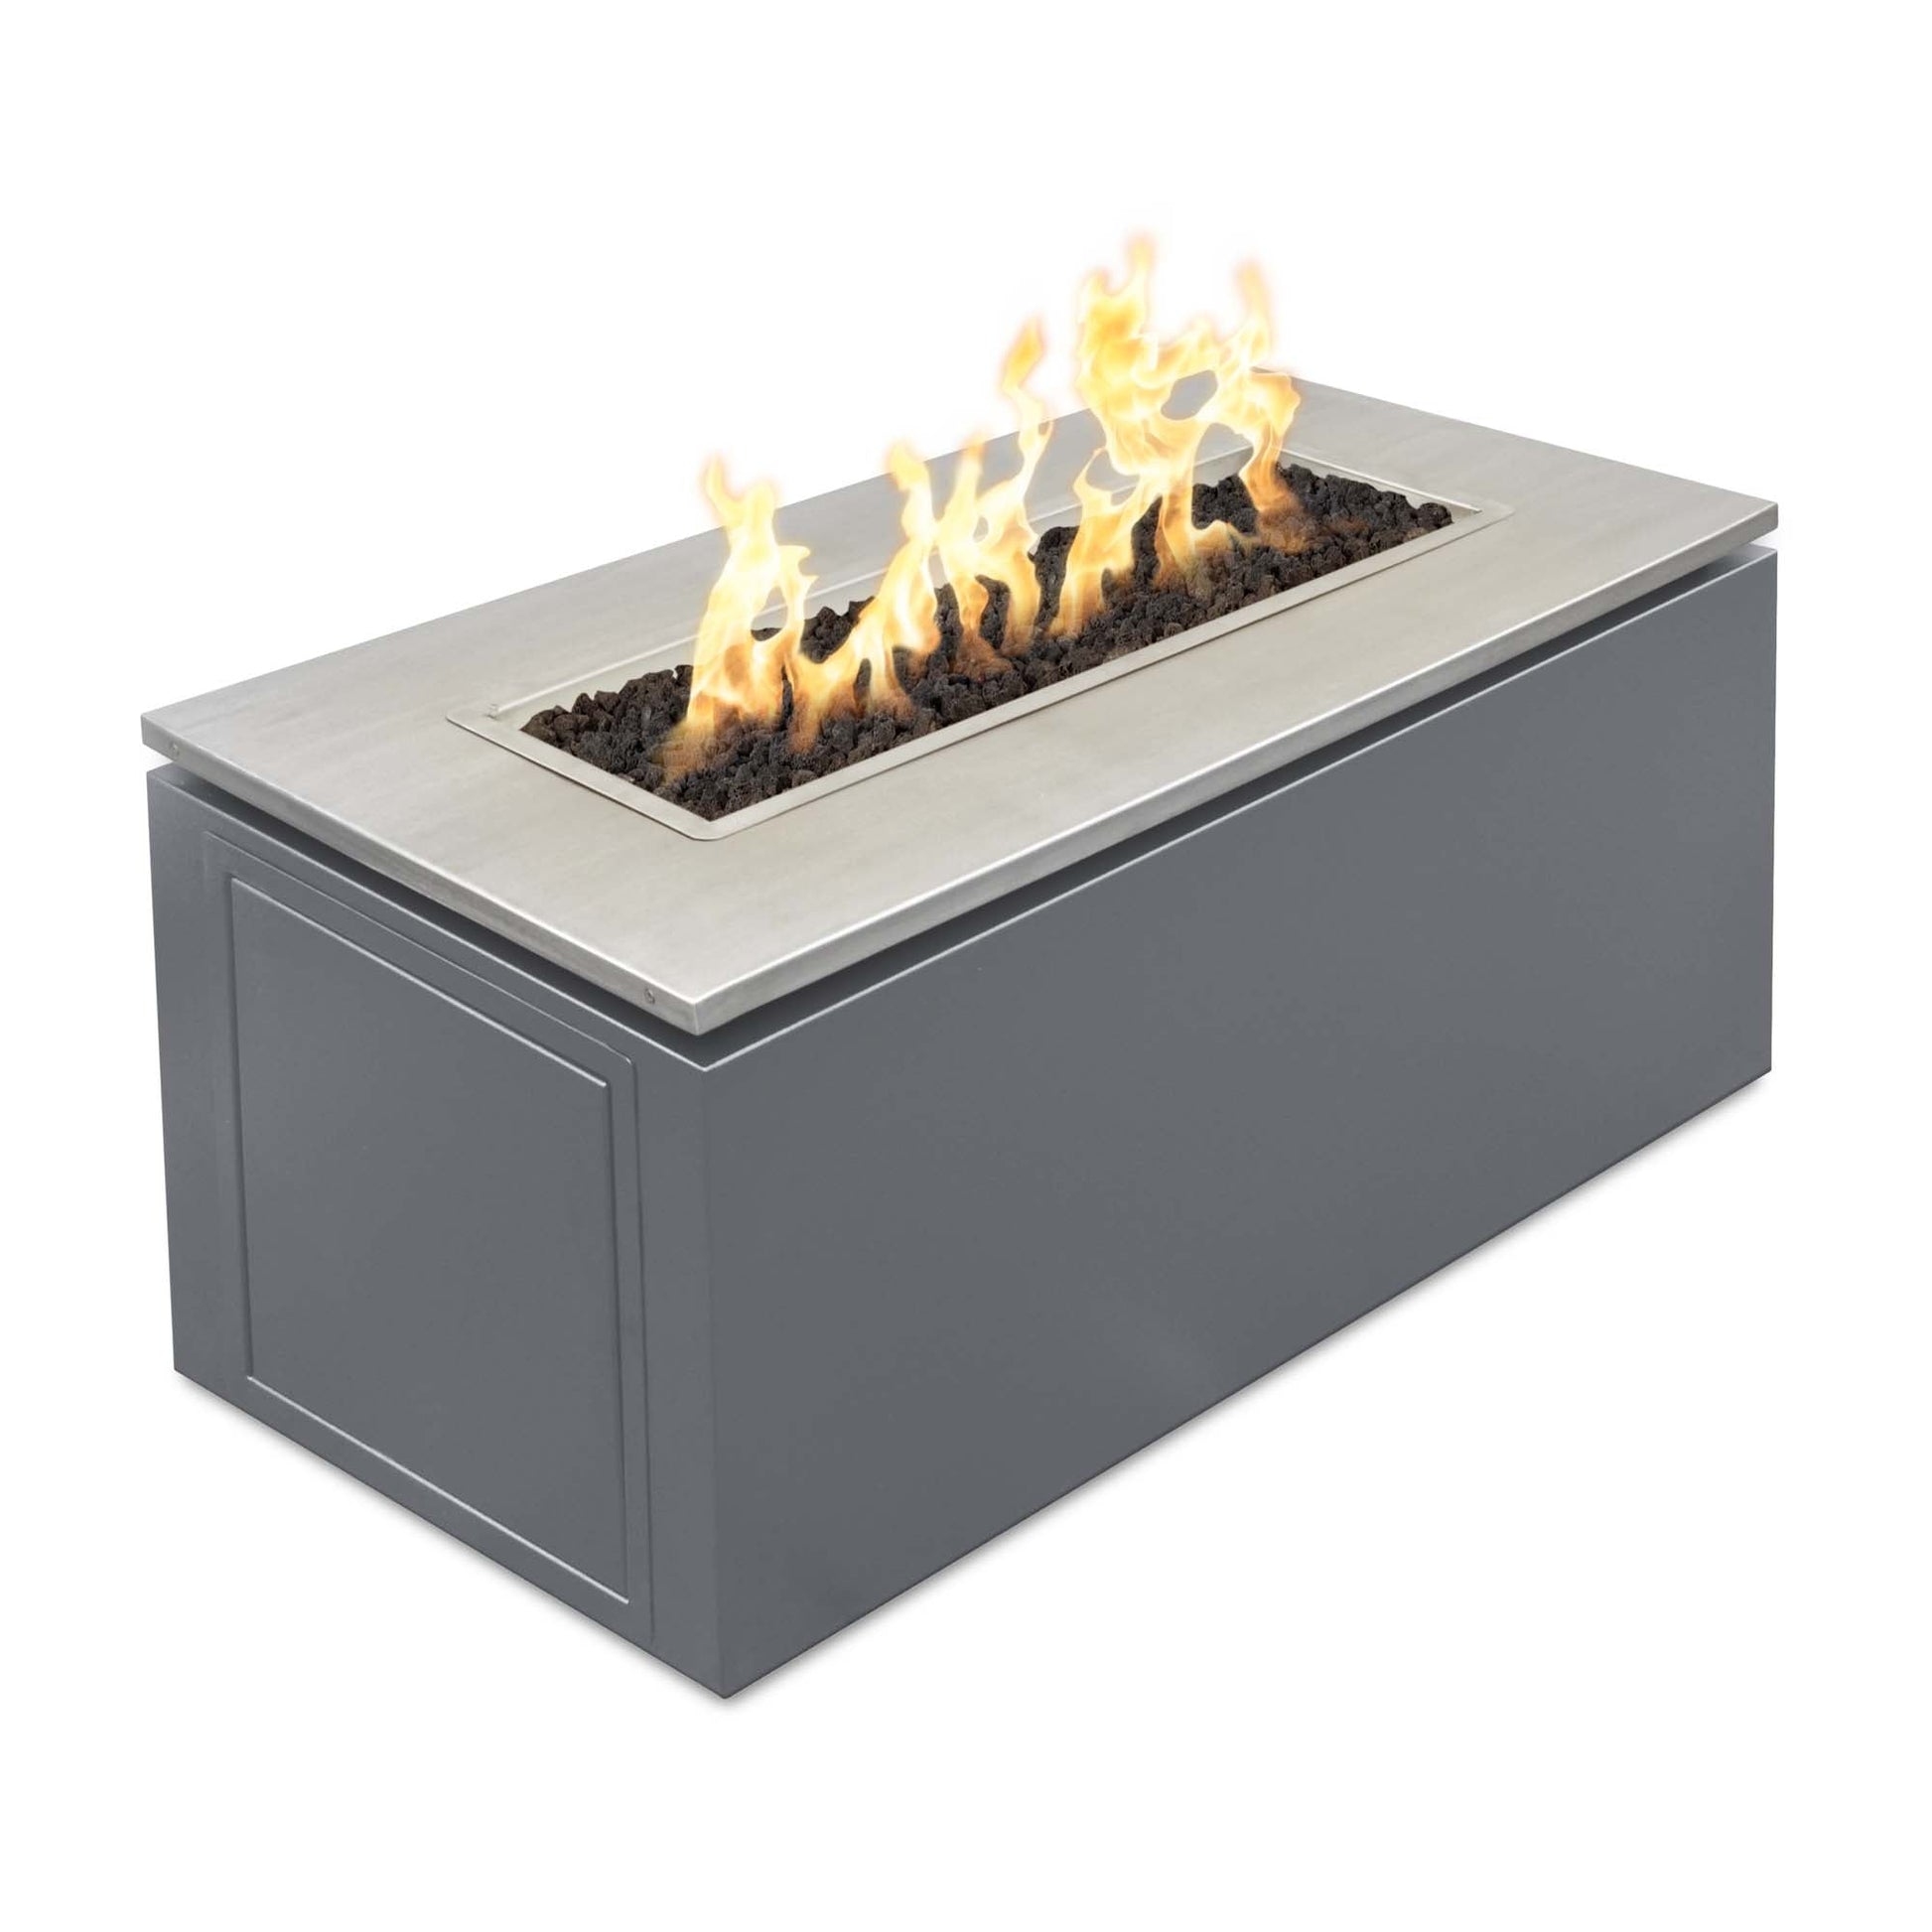 The Outdoor Plus Rectangular Merona 46" Stainless Steel Liquid Propane Fire Pit with Match Lit Ignition